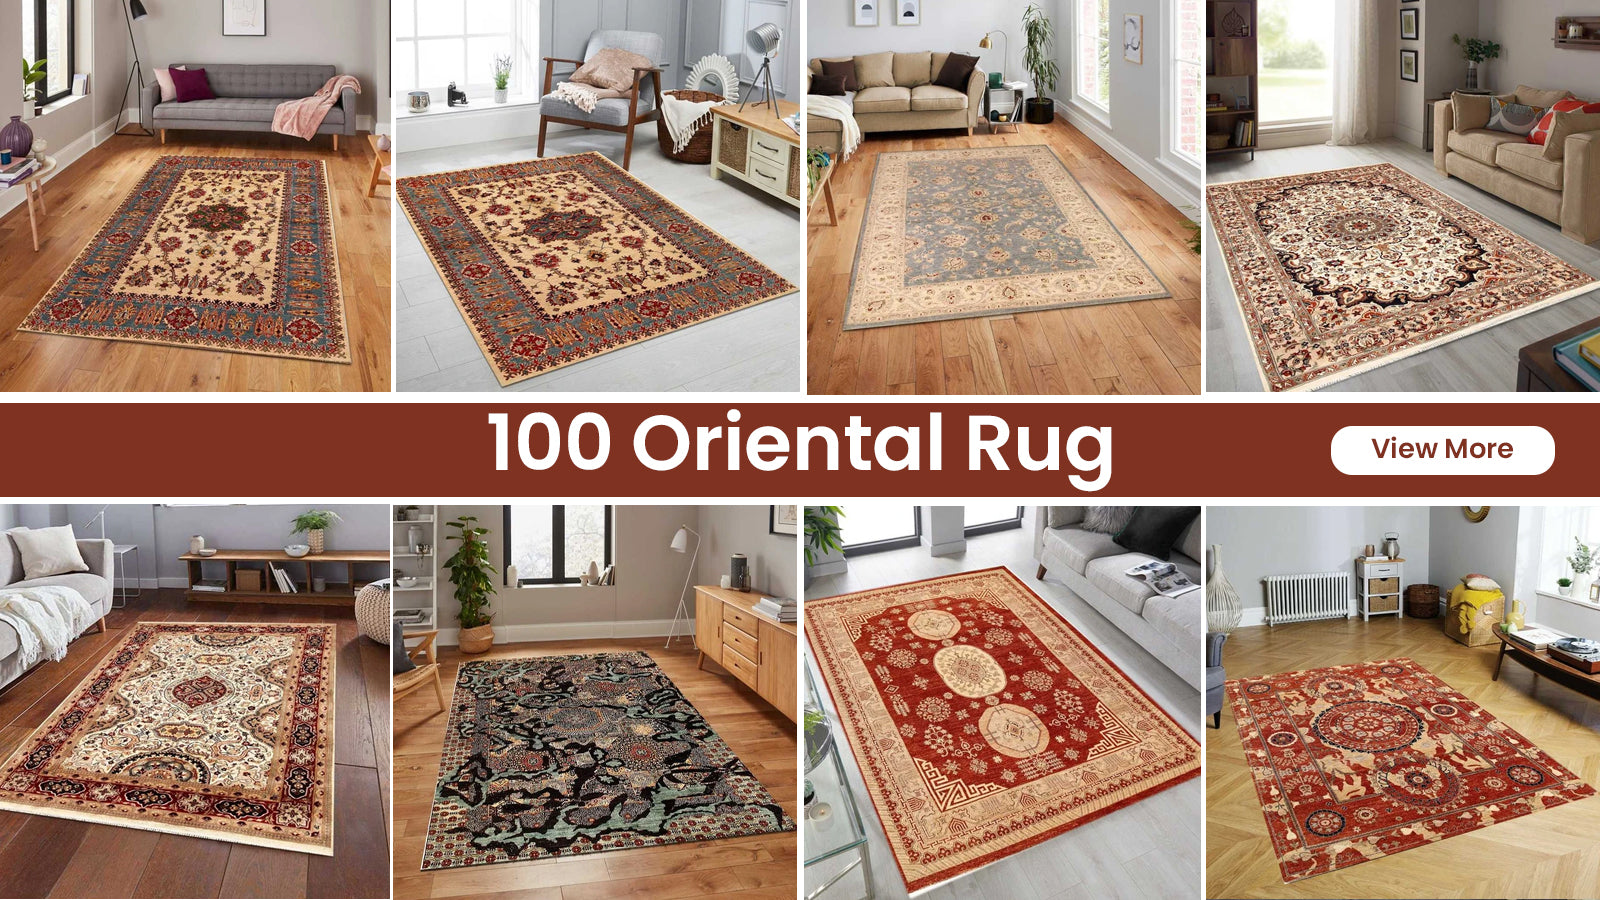 How to Keep Rugs From Sliding: 4 Easy (And Cheap) Solutions